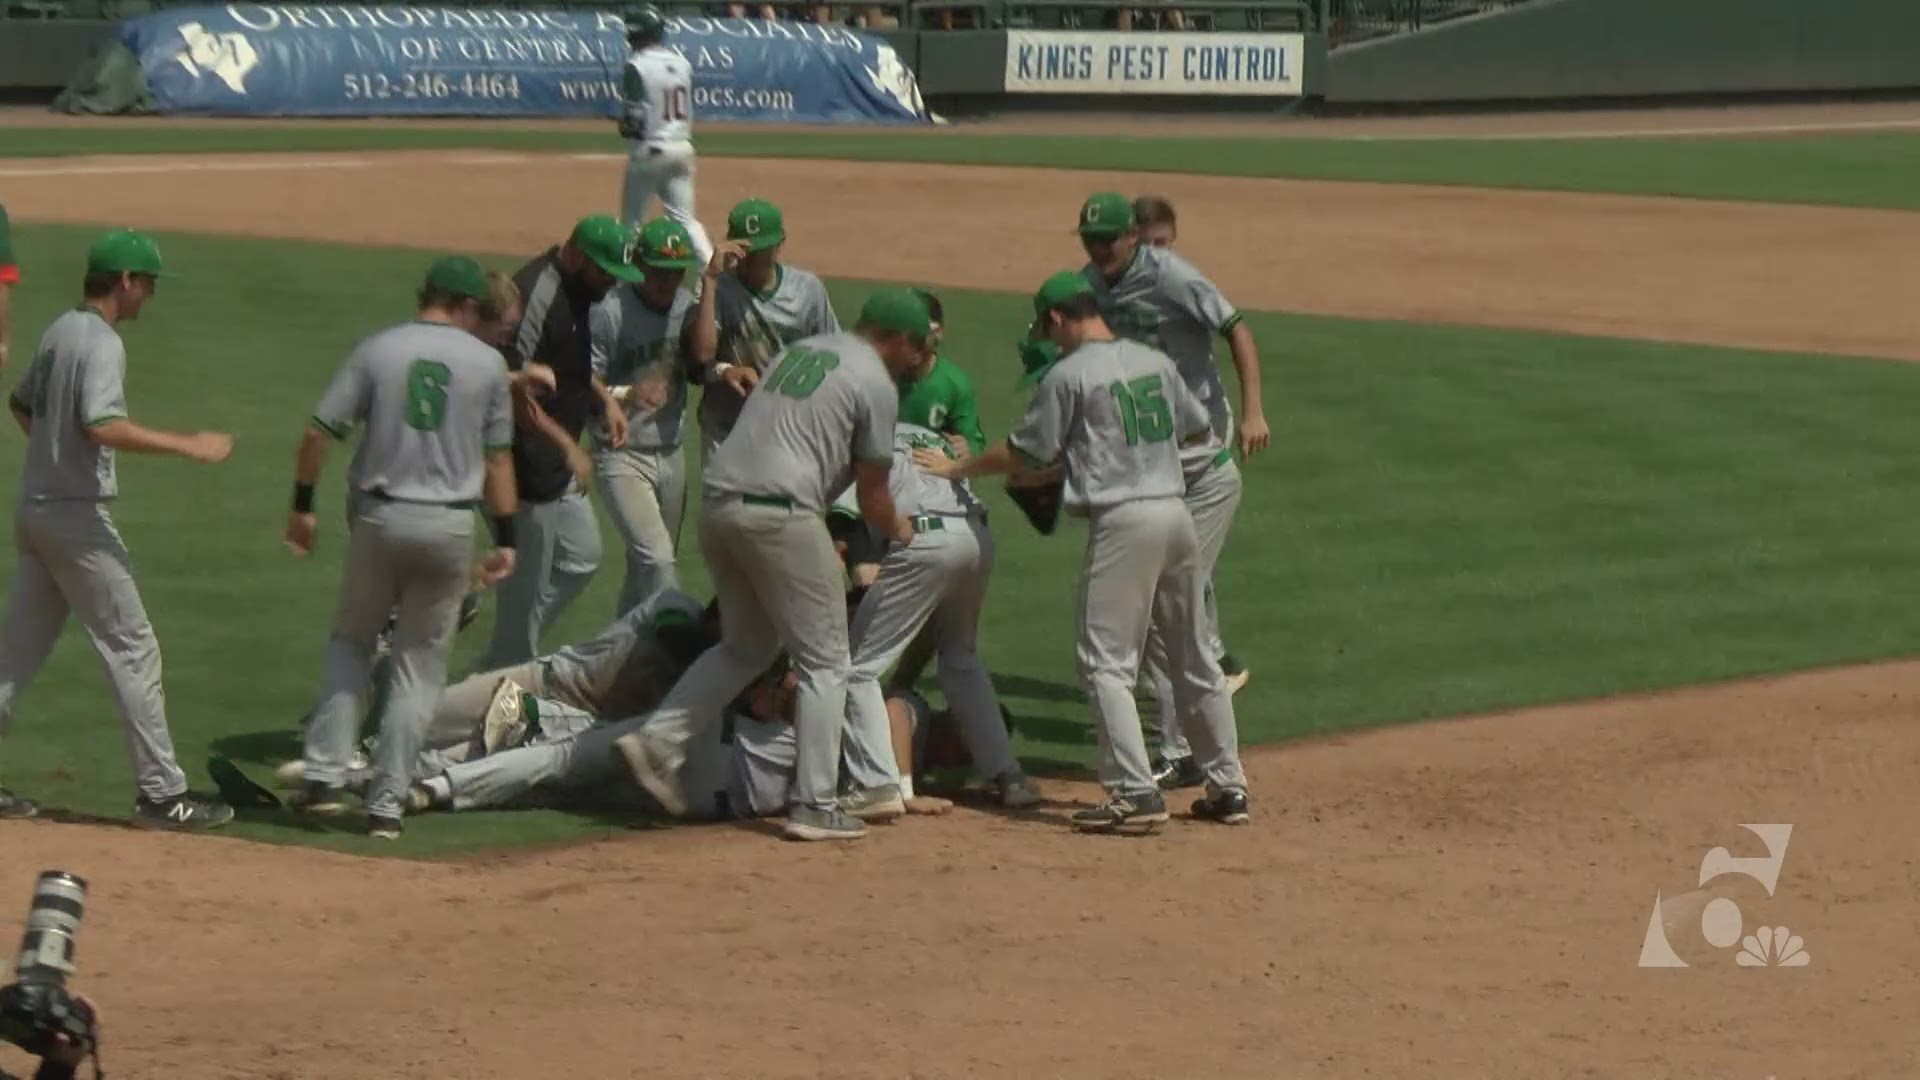 The Clifton Cubs advanced to the state championship with this final out of the game.